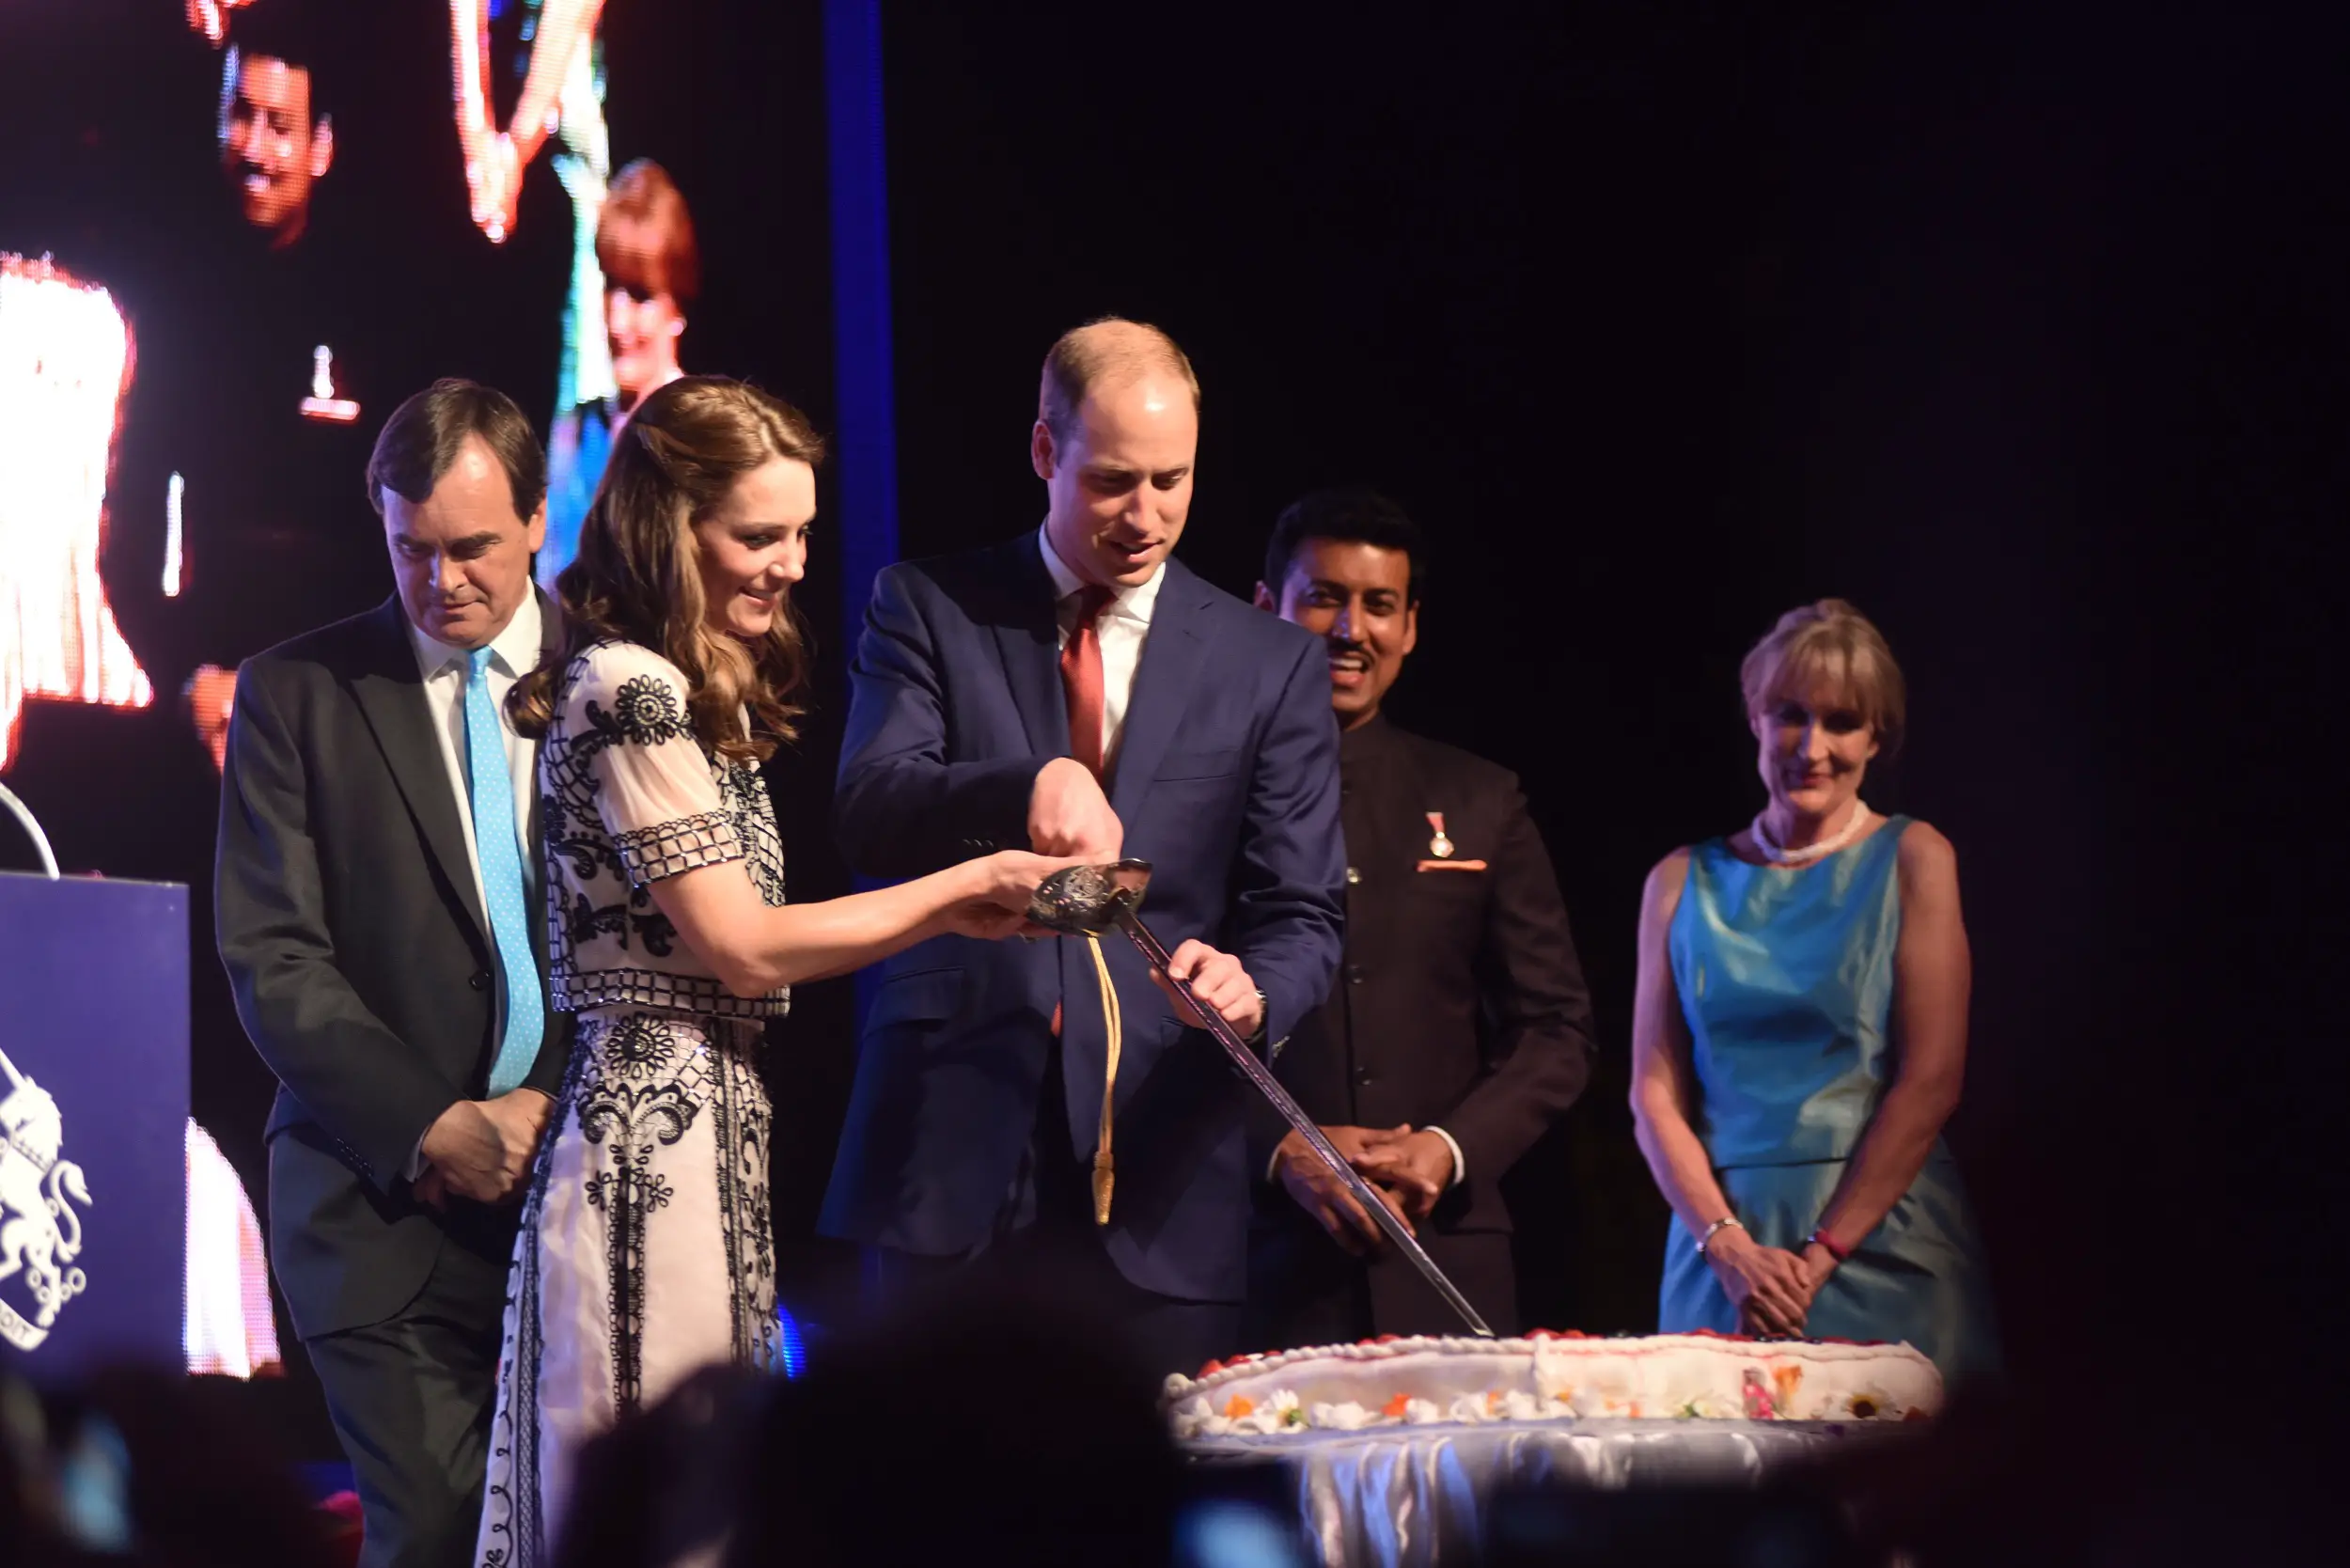 William and Catherine cut the cake using a decorated sword